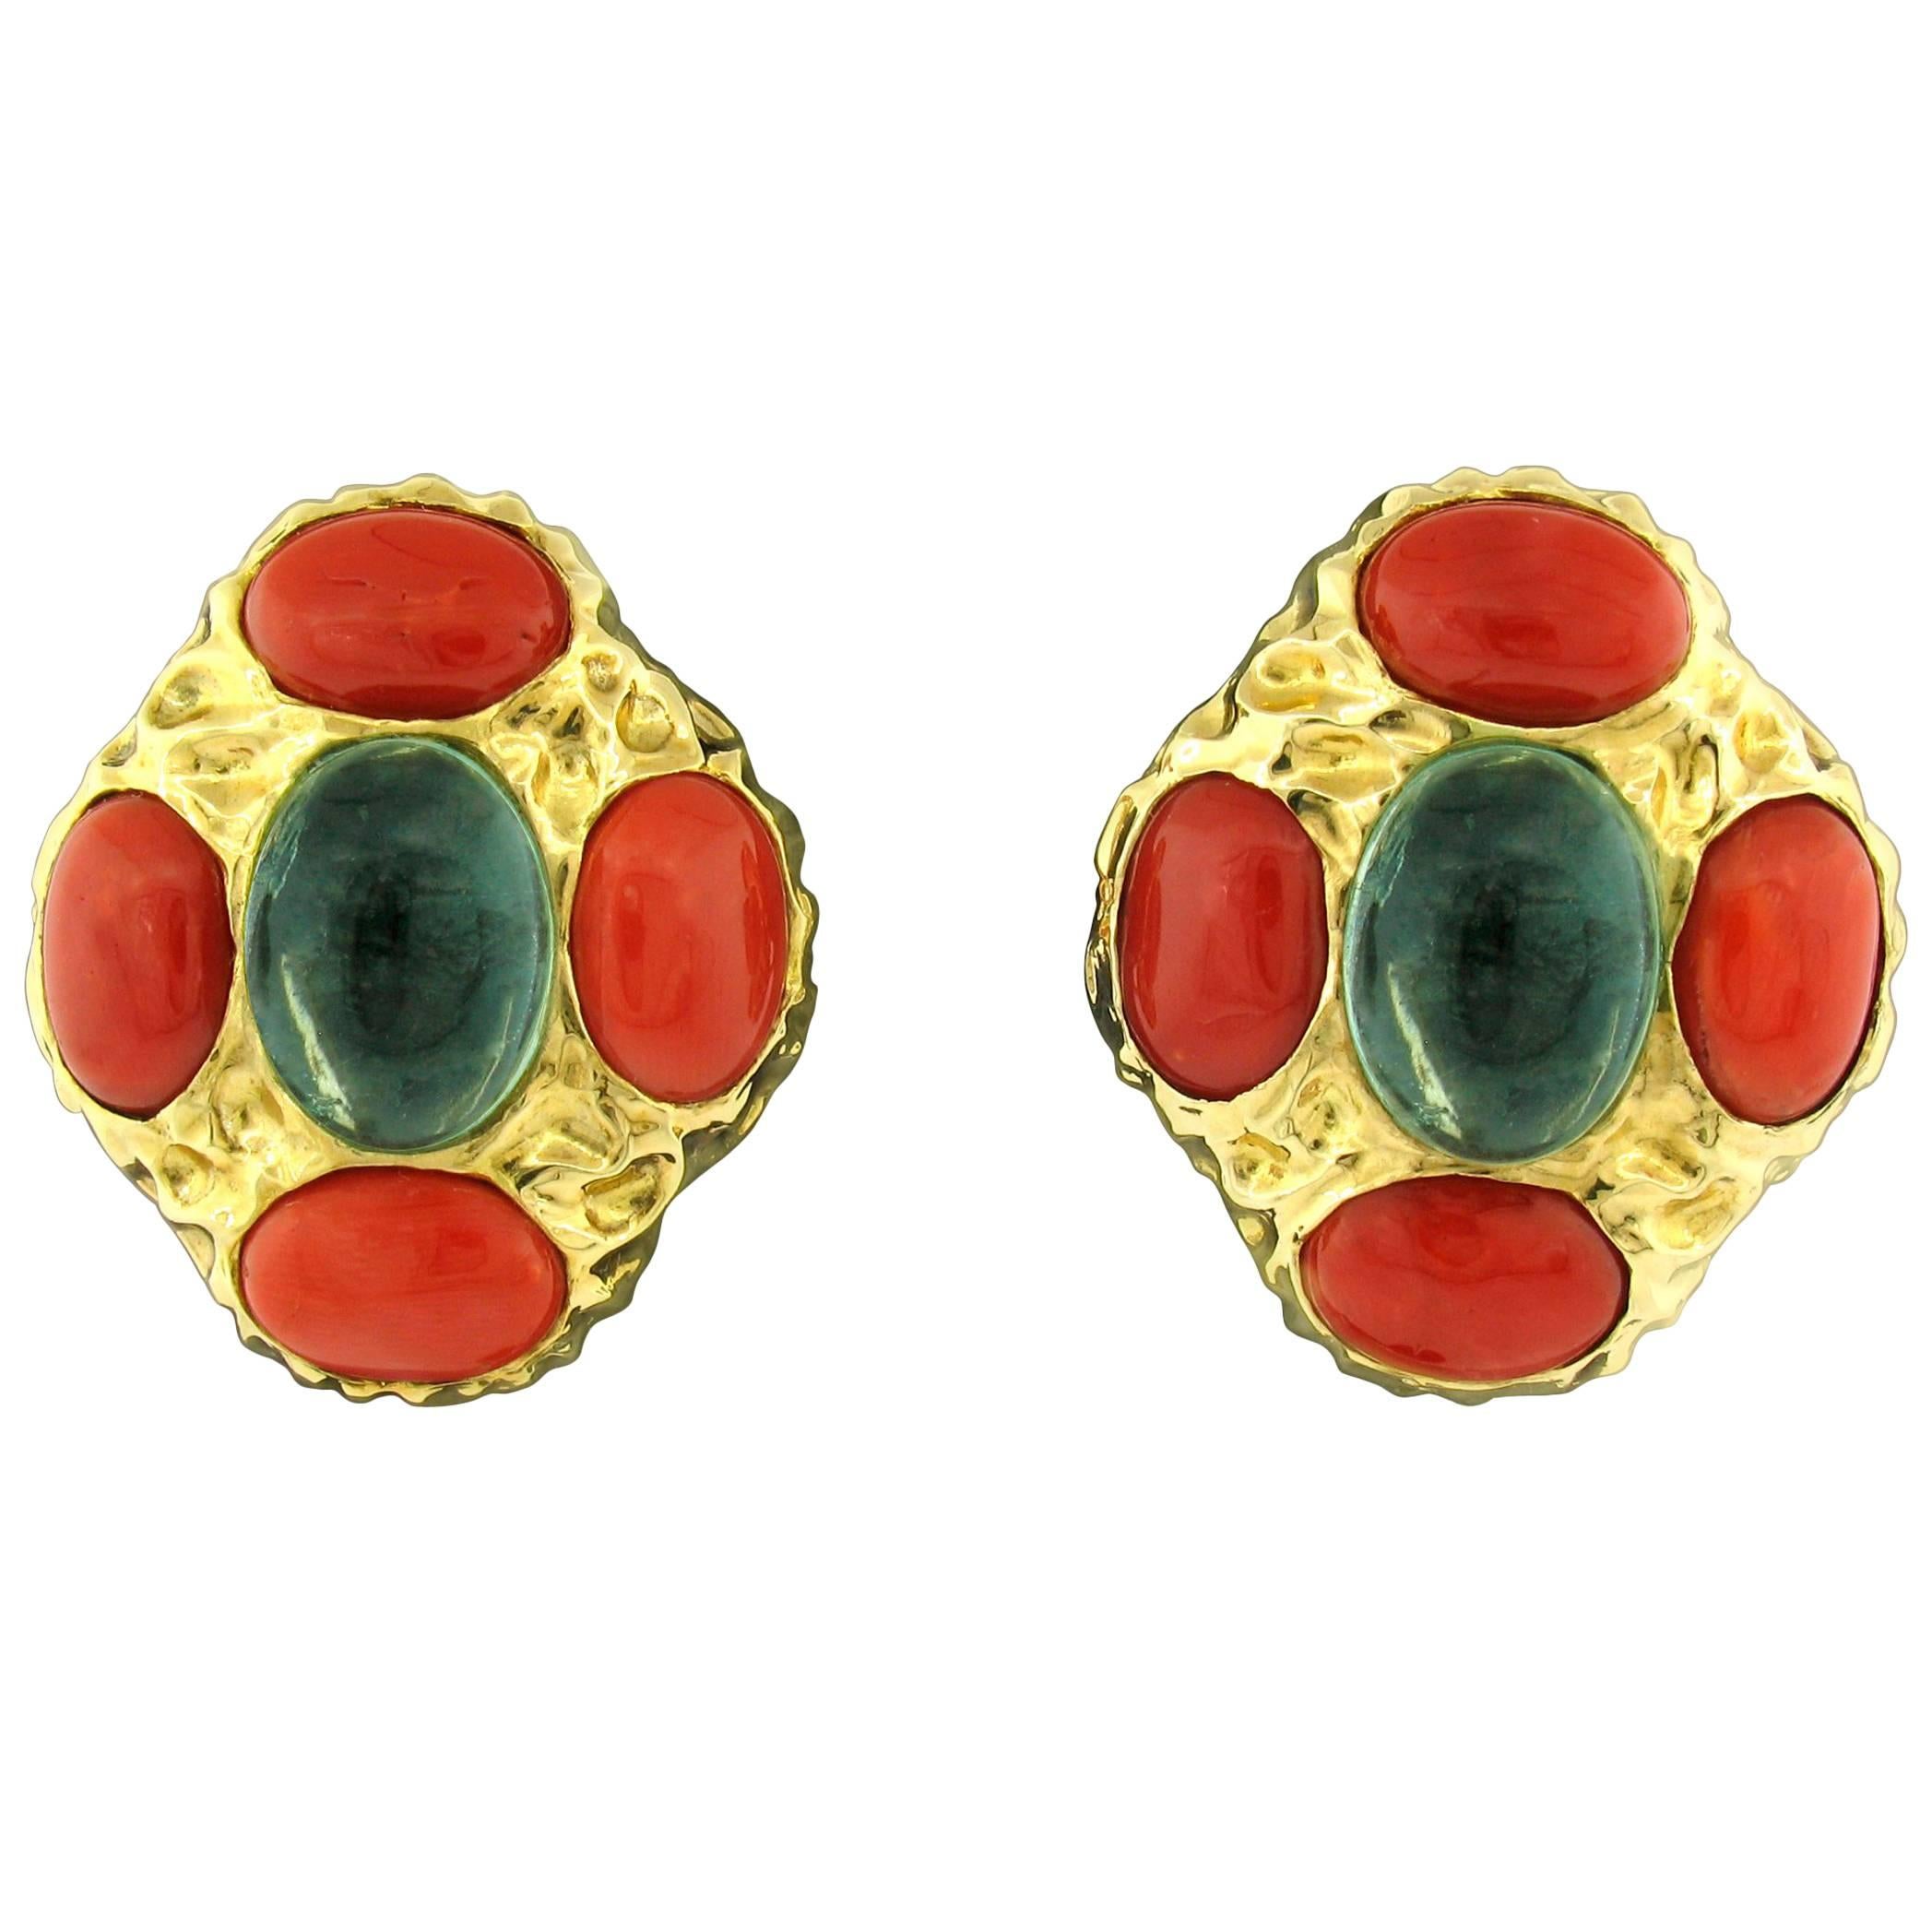 Tony Duquette Florite and Coral Earrings in 18 Karat Gold